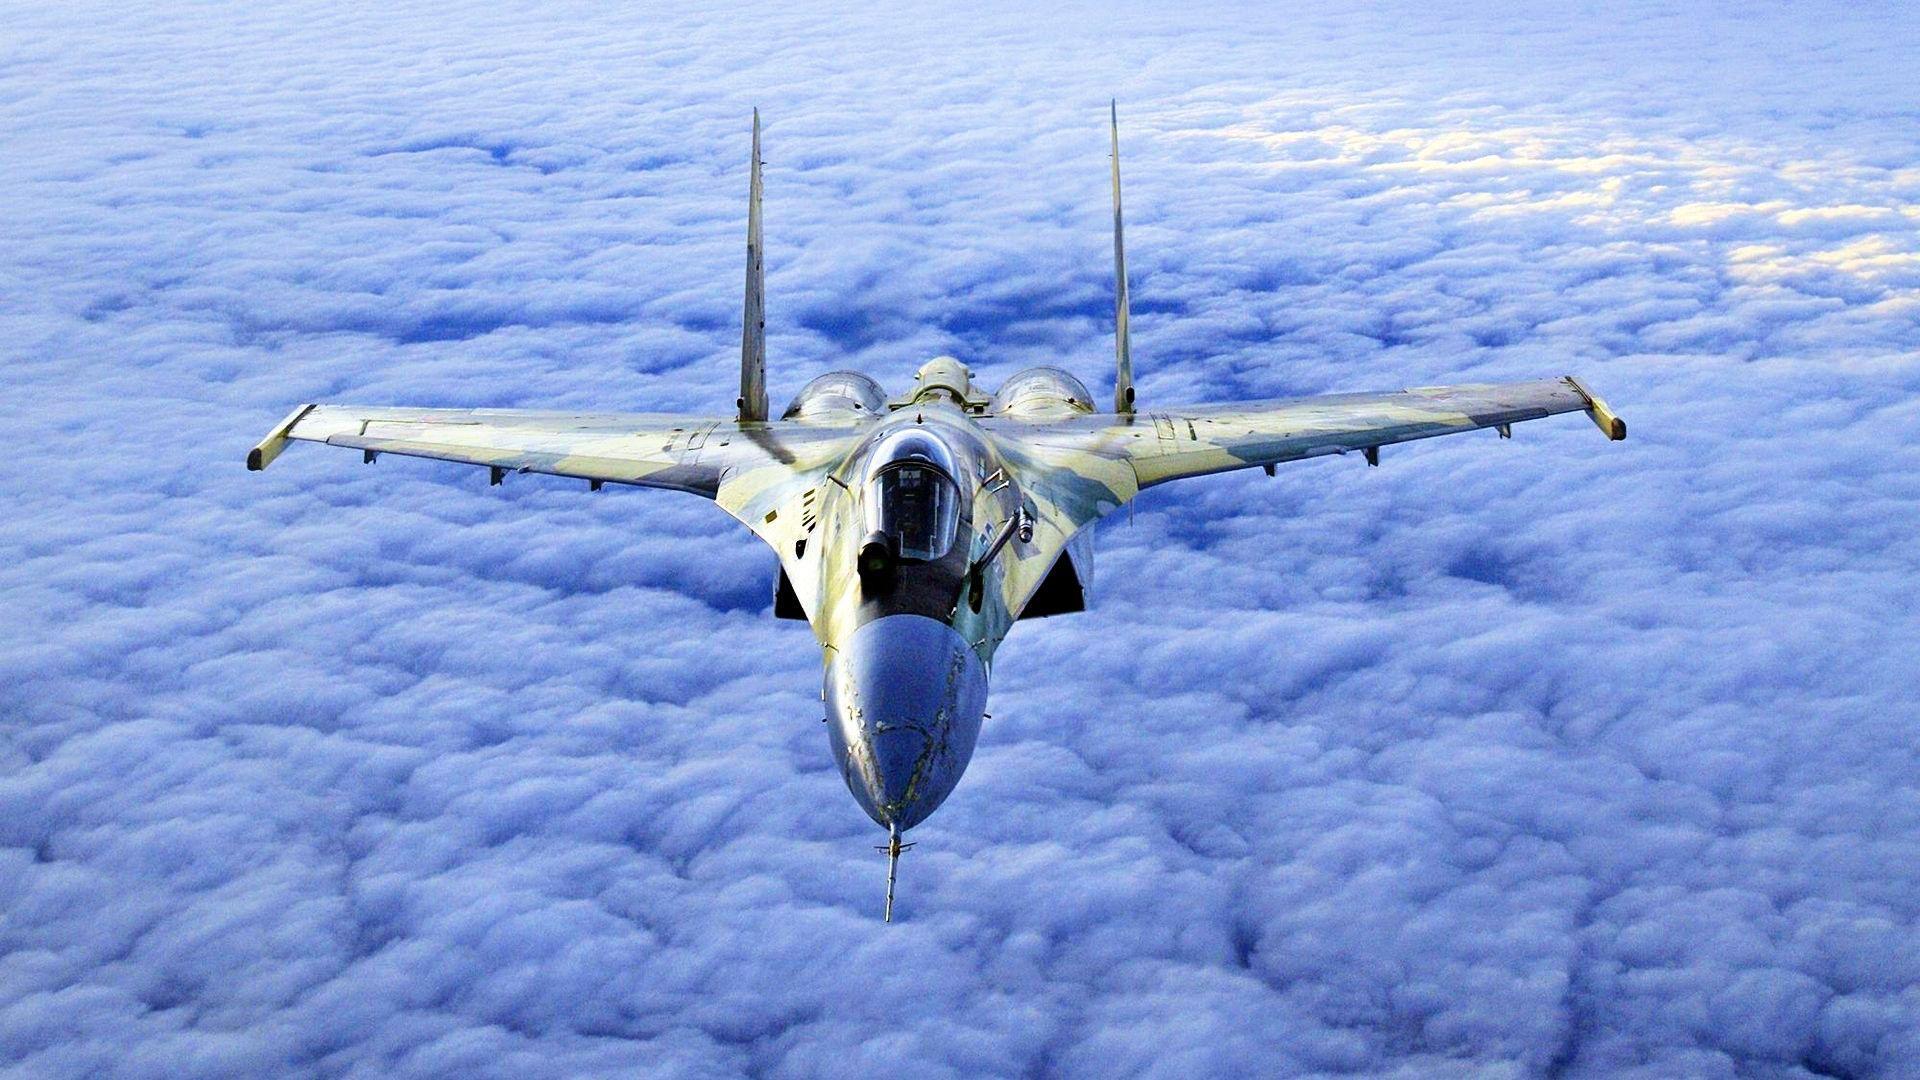 Fighter Jets Wall Paper Wallpapers